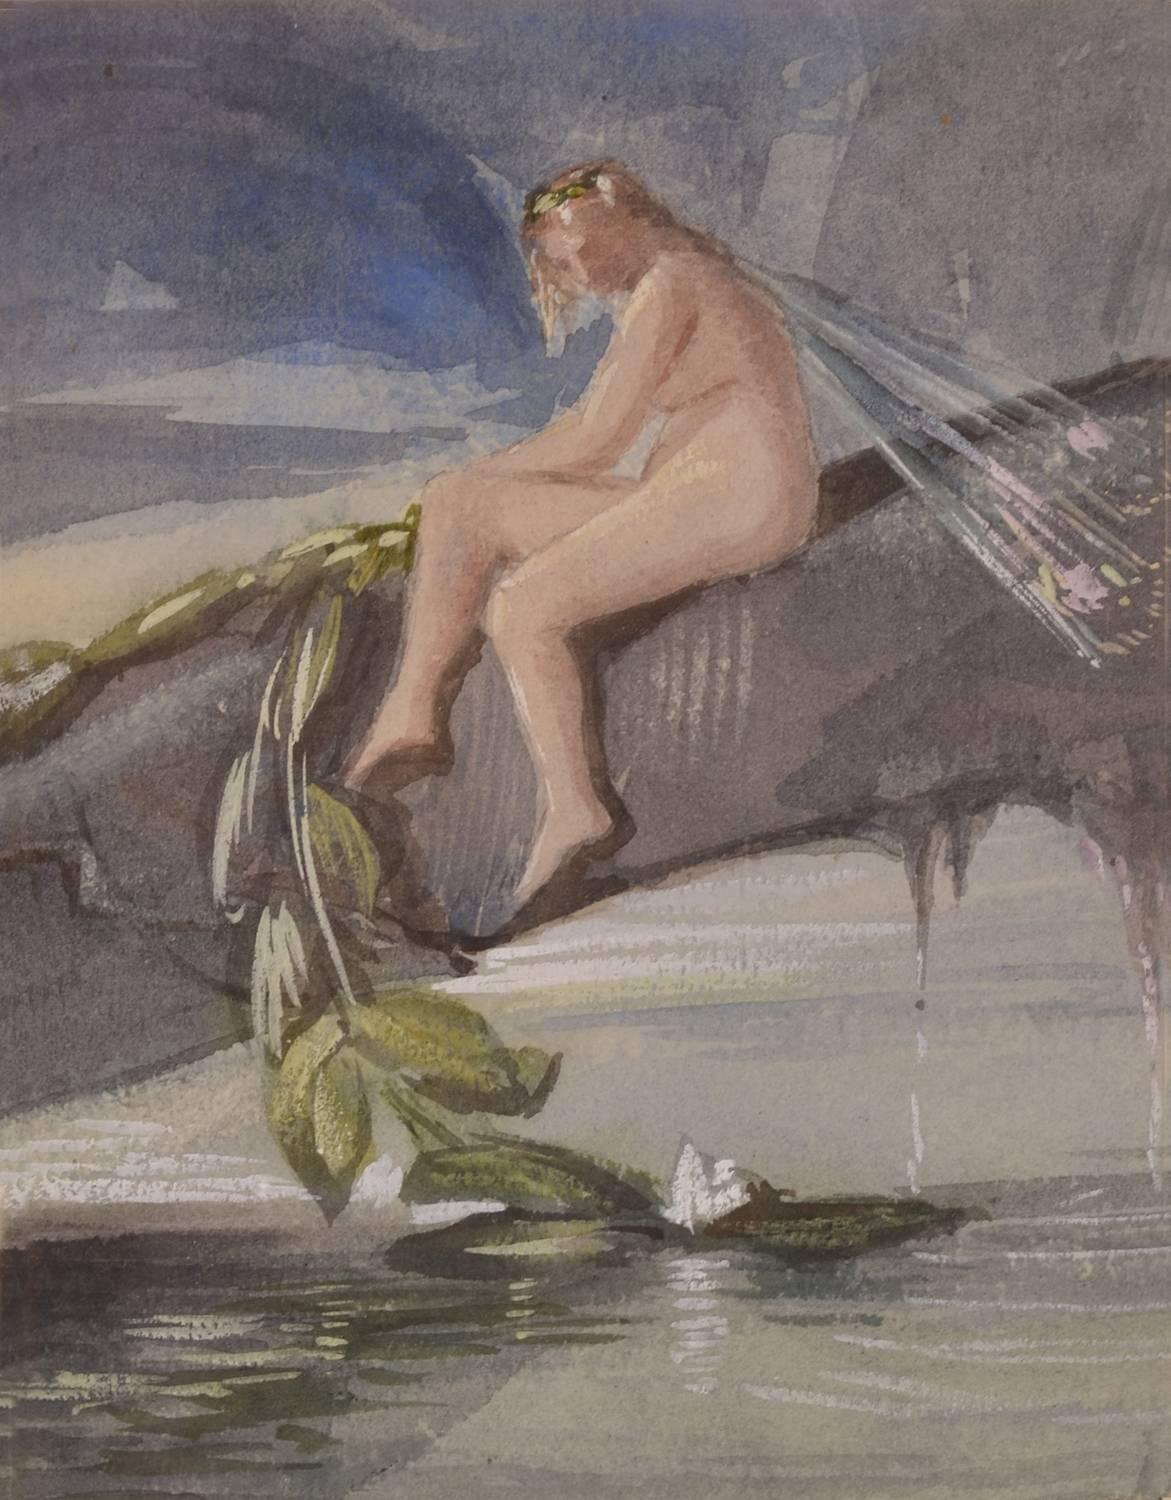 Ernest Collier Figurative Art - The River Nymph, Early 20th Century Art-Deco Watercolour